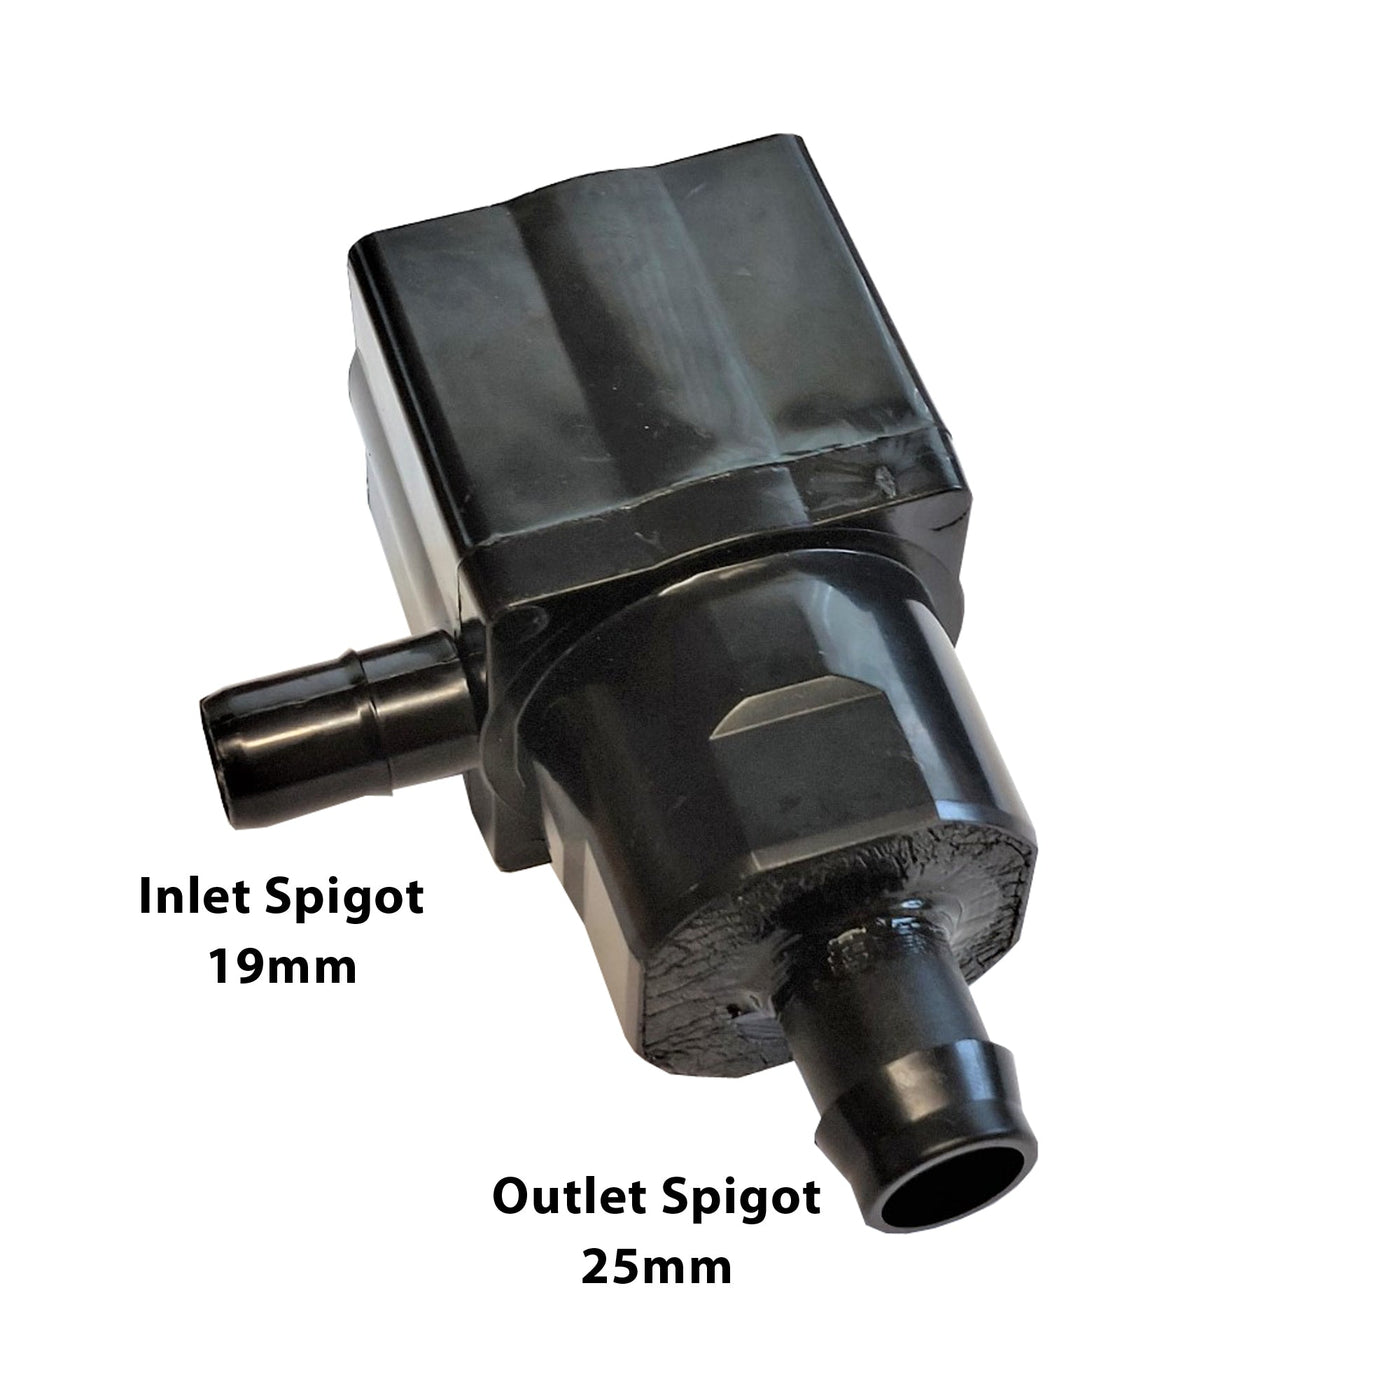 bypass diverter for water butt with short or cut off downpipe that does not go to the ground